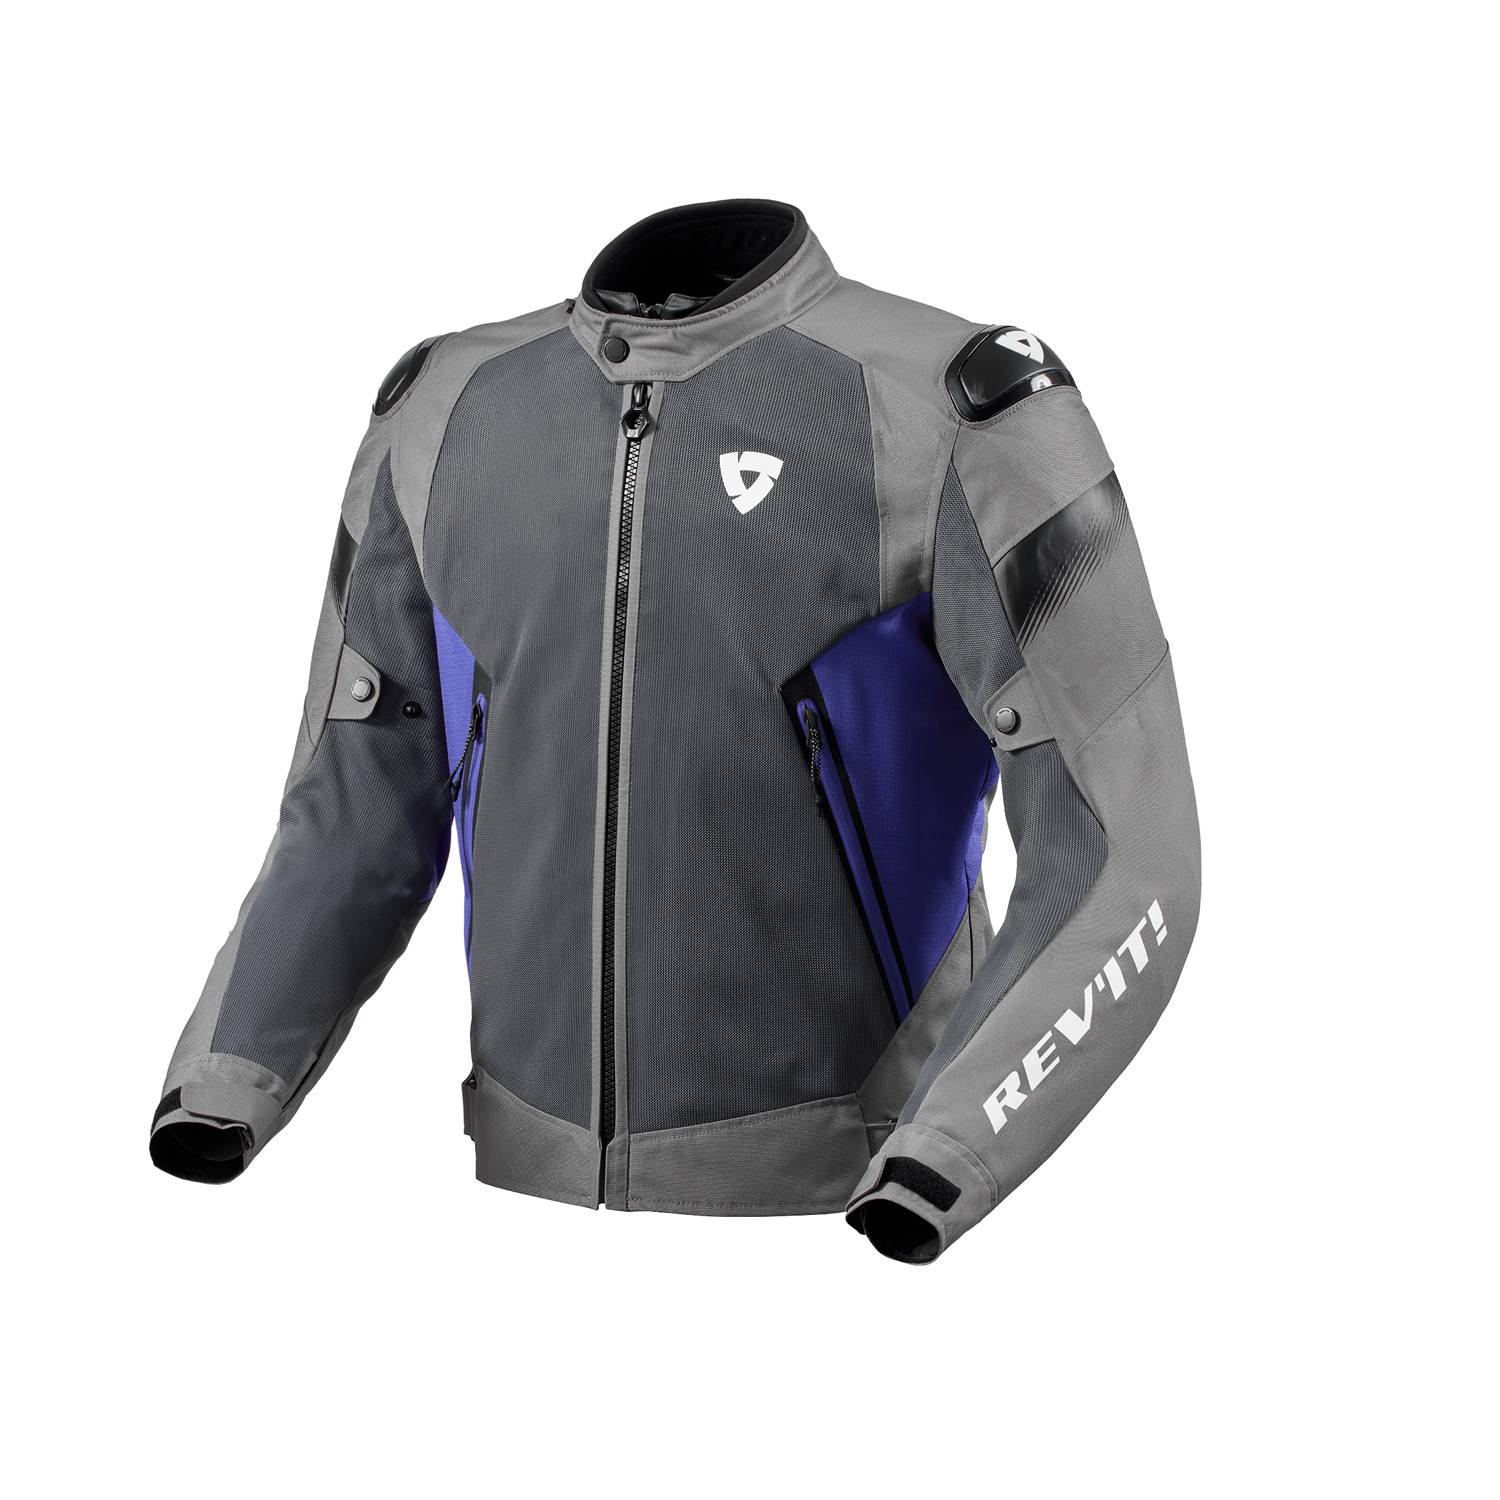 Image of REV'IT! Control Air H2O Jacket Grey Blue Size S ID 8700001385060